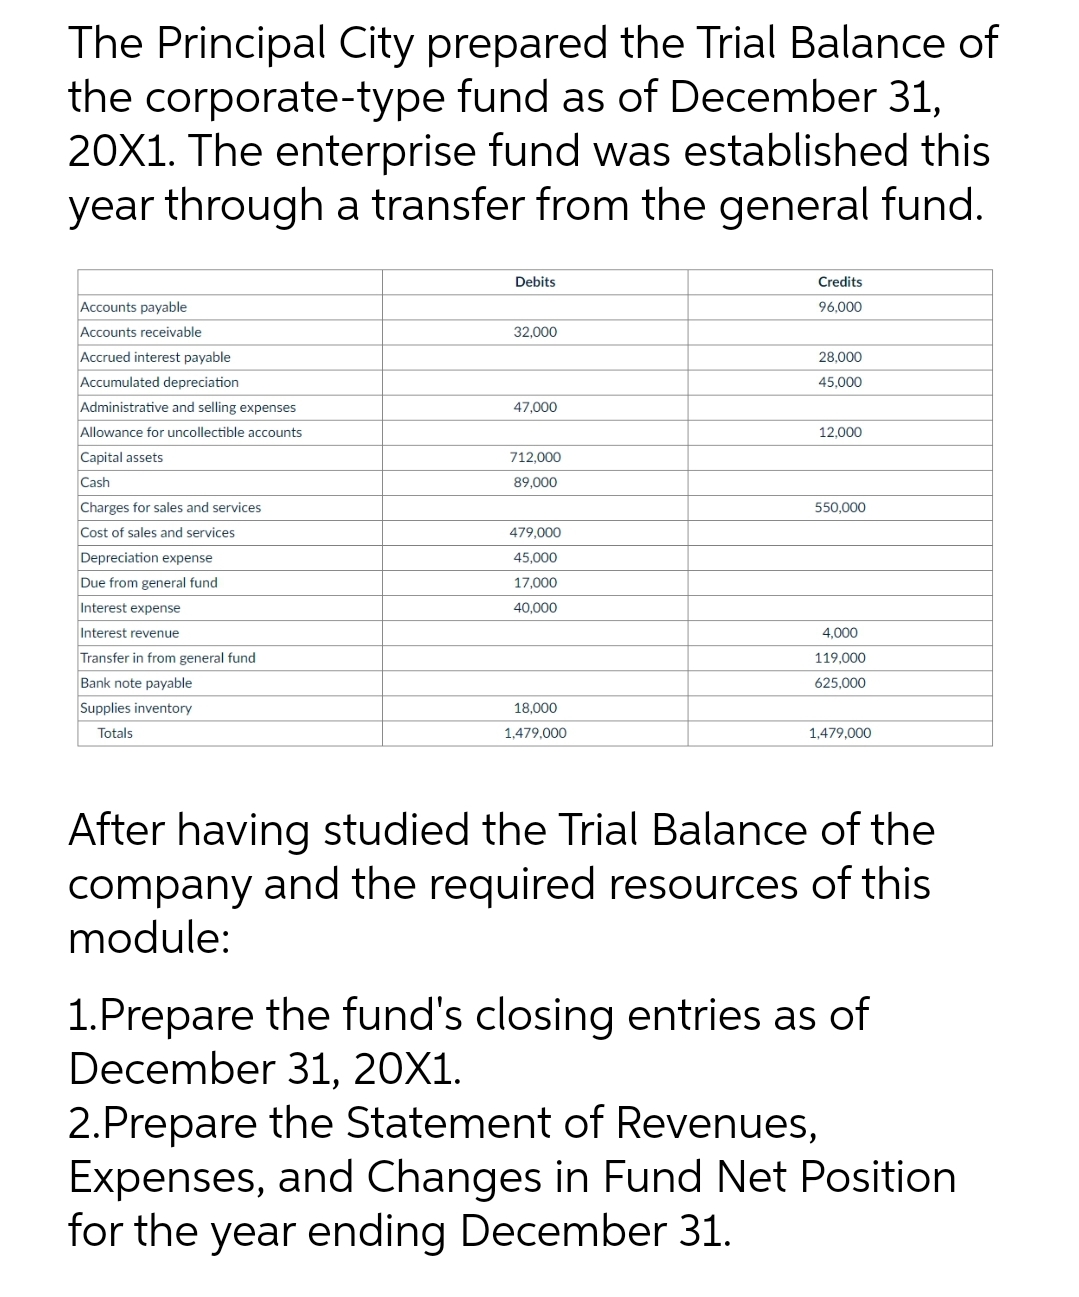 The Principal City prepared the Trial Balance of
the corporate-type fund as of December 31,
20X1. The enterprise fund was established this
year through a transfer from the general fund.
Debits
Credits
Accounts payable
96,000
Accounts receivable
32,000
Accrued interest payable
28,000
Accumulated depreciation
45,000
Administrative and selling expenses
47,000
Allowance for uncollectible accounts
12,000
Capital assets
712,000
Cash
89,000
Charges for sales and services
550,000
Cost of sales and services
479,000
Depreciation expense
45,000
Due from general fund
17,000
Interest expense
40,000
Interest revenue
4,000
Transfer in from general fund
119,000
Bank note payable
Supplies inventory
625.000
18,000
Totals
1,479,000
1,479,000
After having studied the Trial Balance of the
company and the required resources of this
module:
1.Prepare the fund's closing entries as of
December 31, 20X1.
2.Prepare the Statement of Revenues,
Expenses, and Changes in Fund Net Position
for the year ending December 31.
